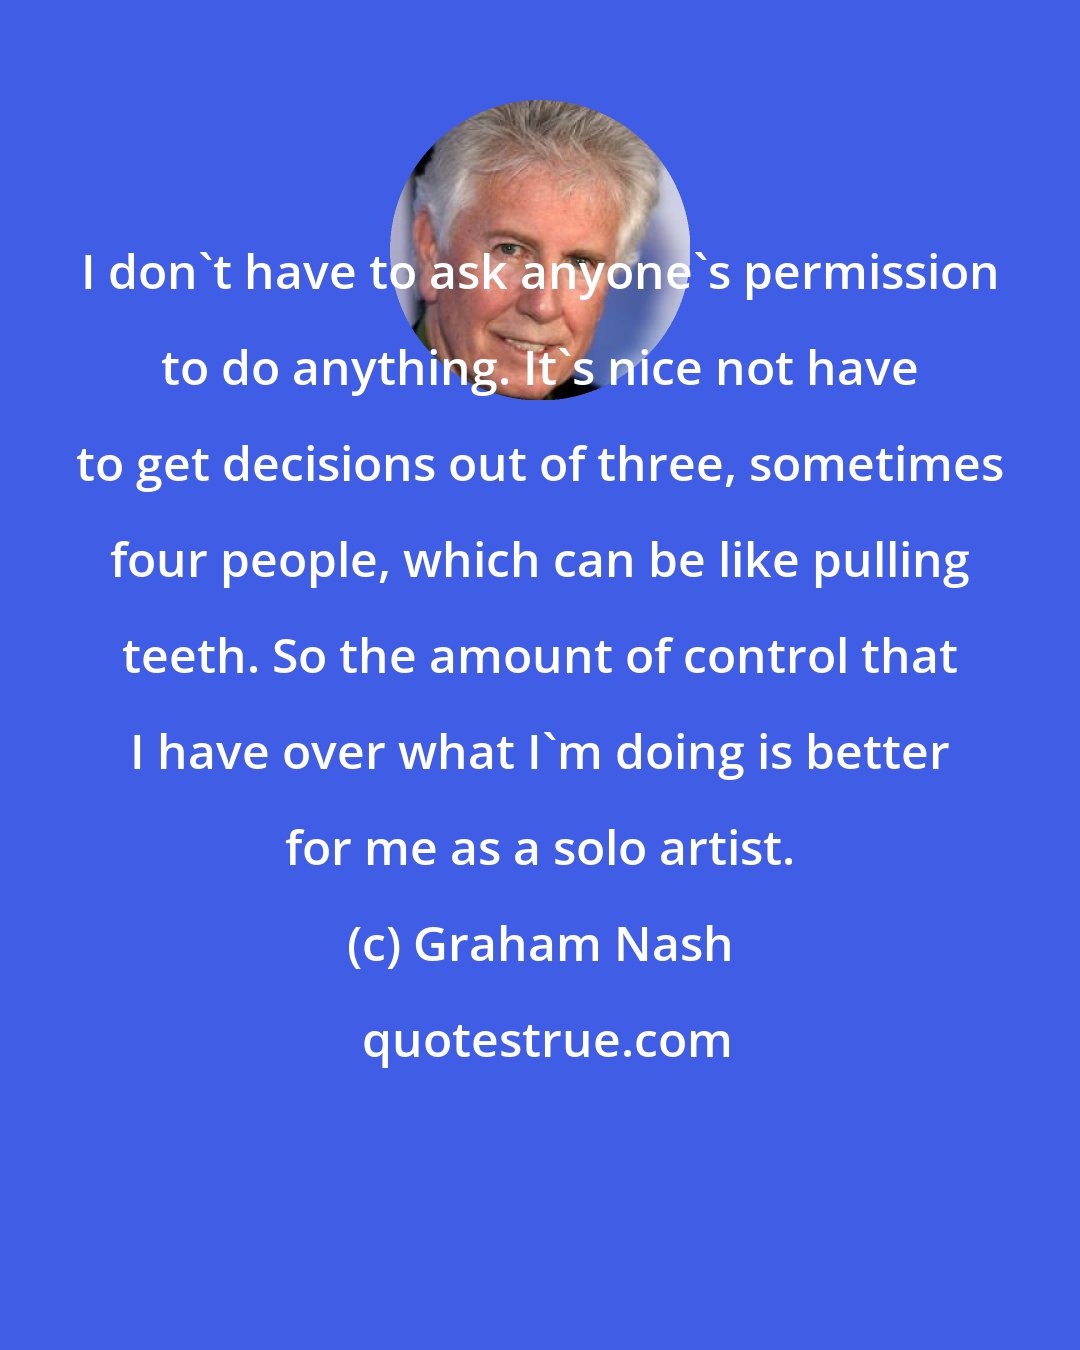 Graham Nash: I don't have to ask anyone's permission to do anything. It's nice not have to get decisions out of three, sometimes four people, which can be like pulling teeth. So the amount of control that I have over what I'm doing is better for me as a solo artist.